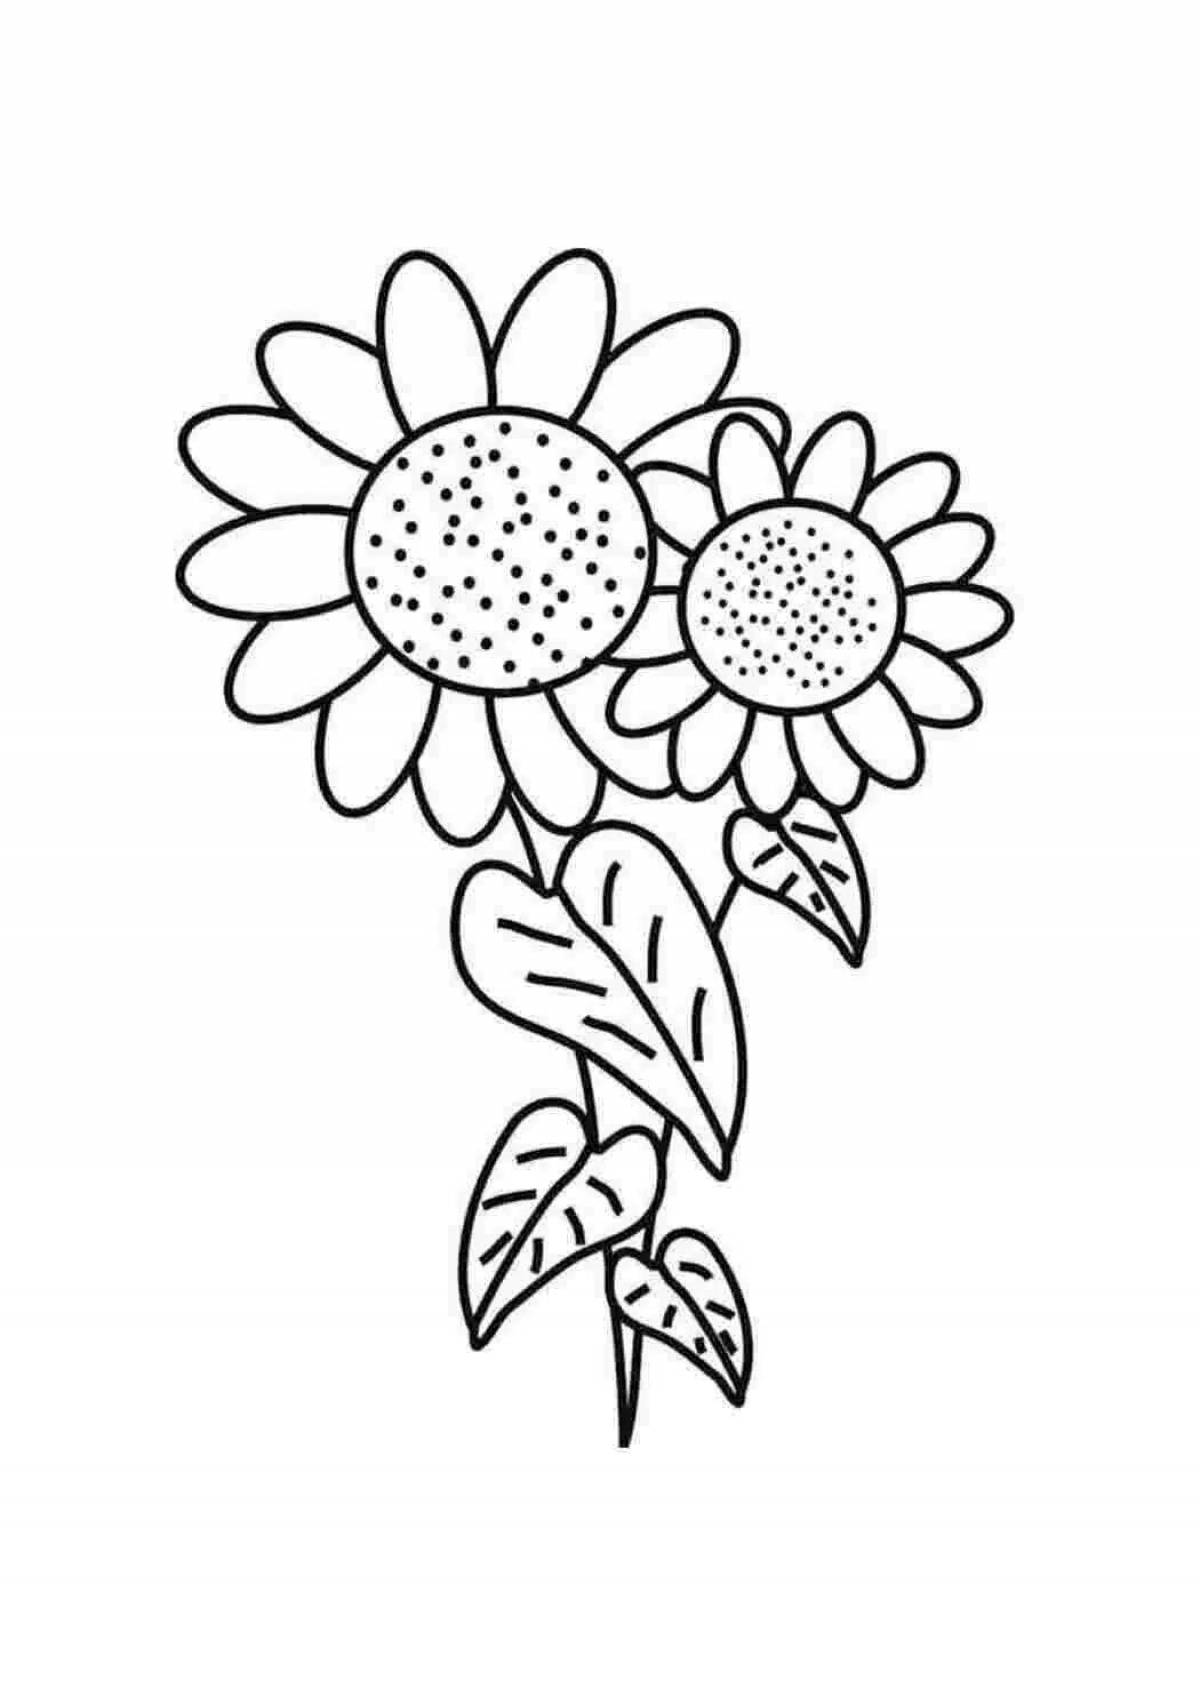 Charming sunflower coloring book for kids 2-3 years old